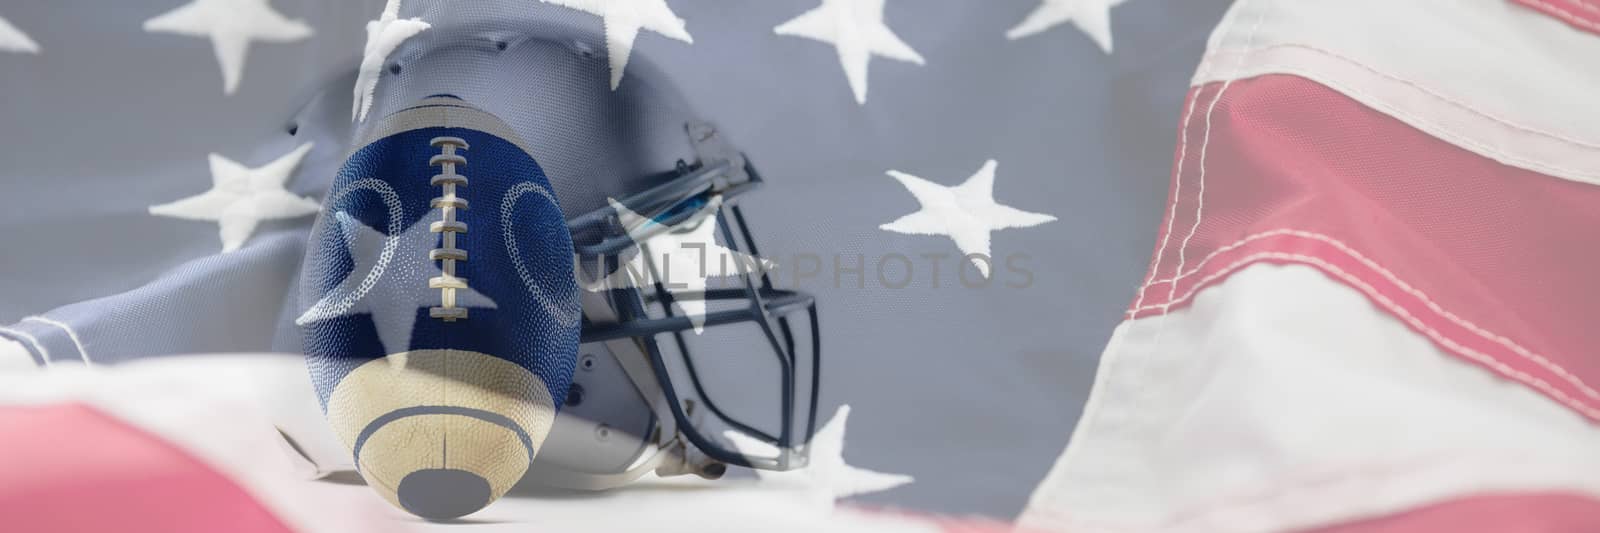 Composite image of close-up of sports helmet and football by Wavebreakmedia